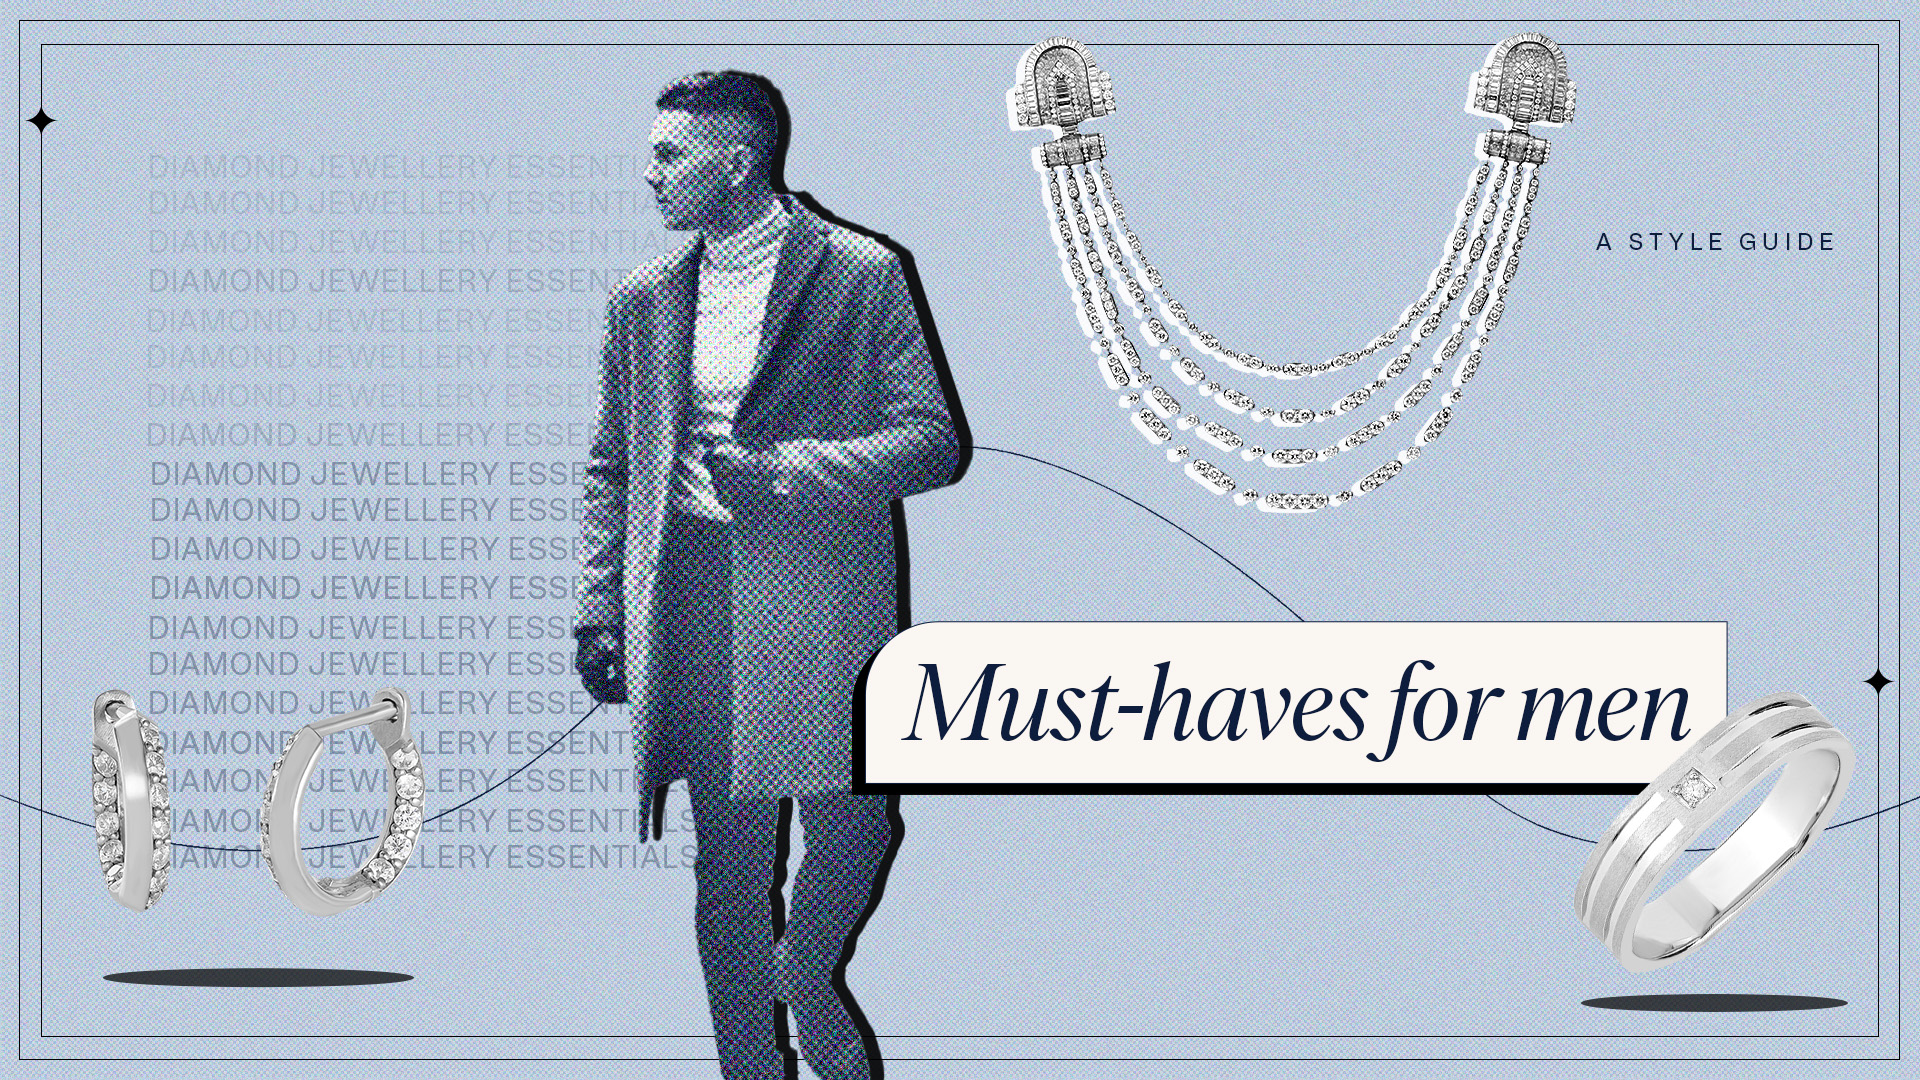 5 Diamond Jewellery Must-haves for Men - Only Natural Diamonds 5